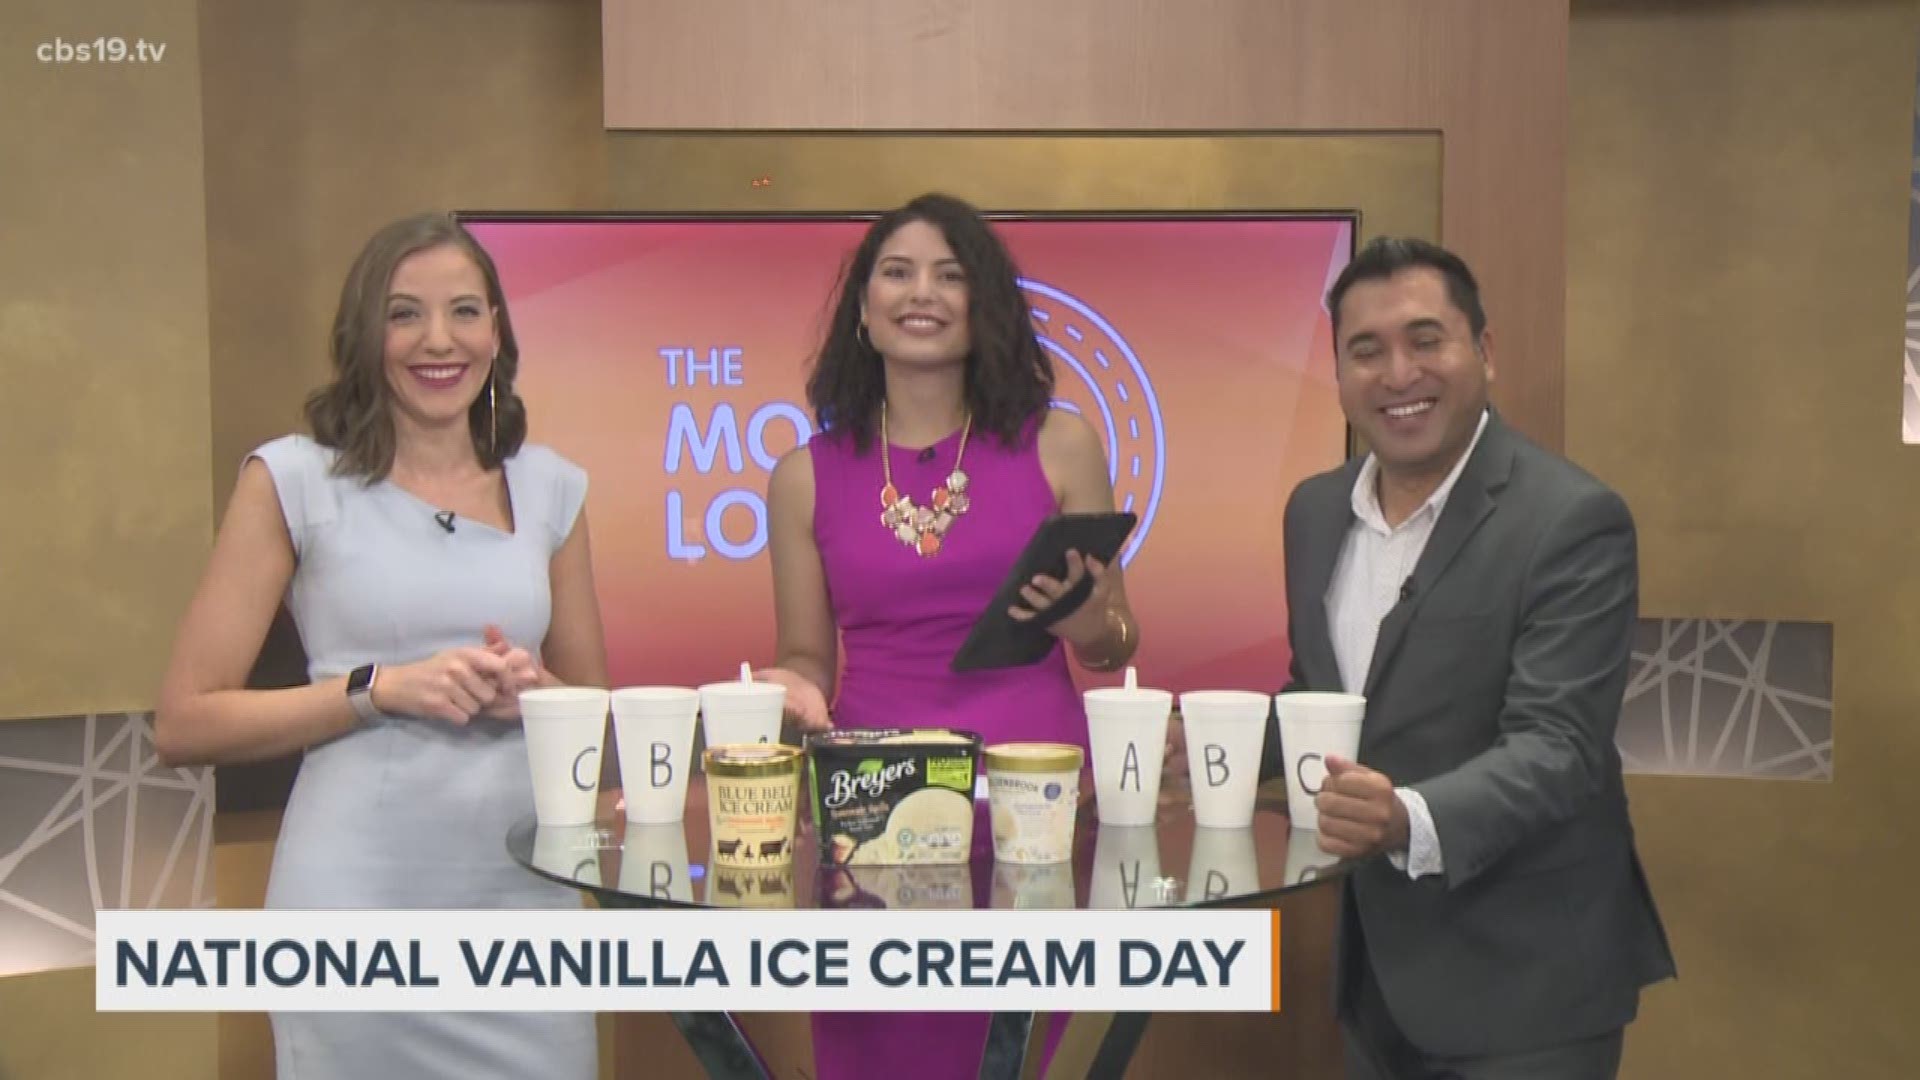 Gaby joins the Morning Loop team for a National Vanilla Ice Cream Day taste test!